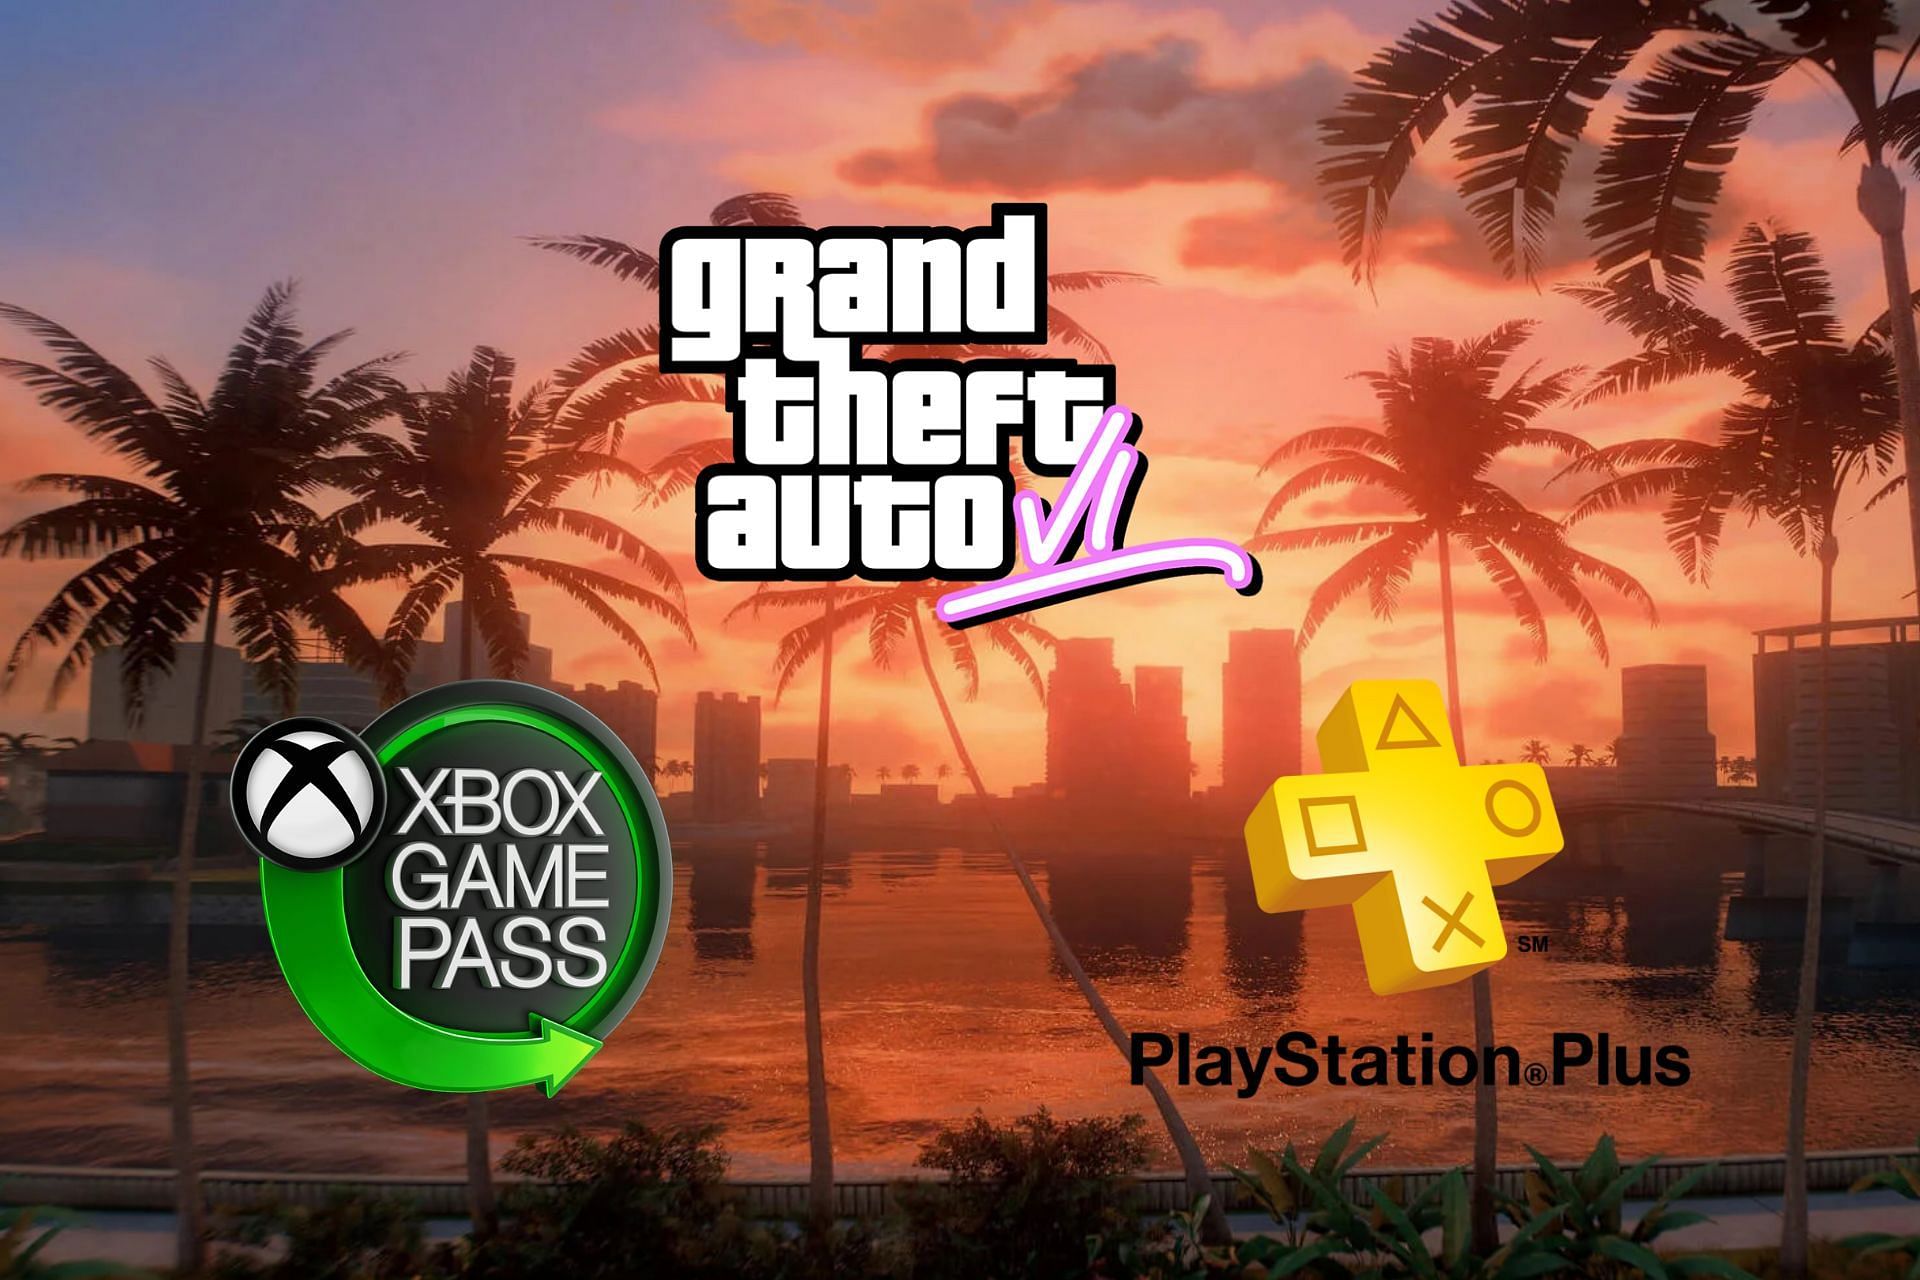 GTA V Added To Xbox Game Pass, Possible GTA 6 Release Date News Emerges